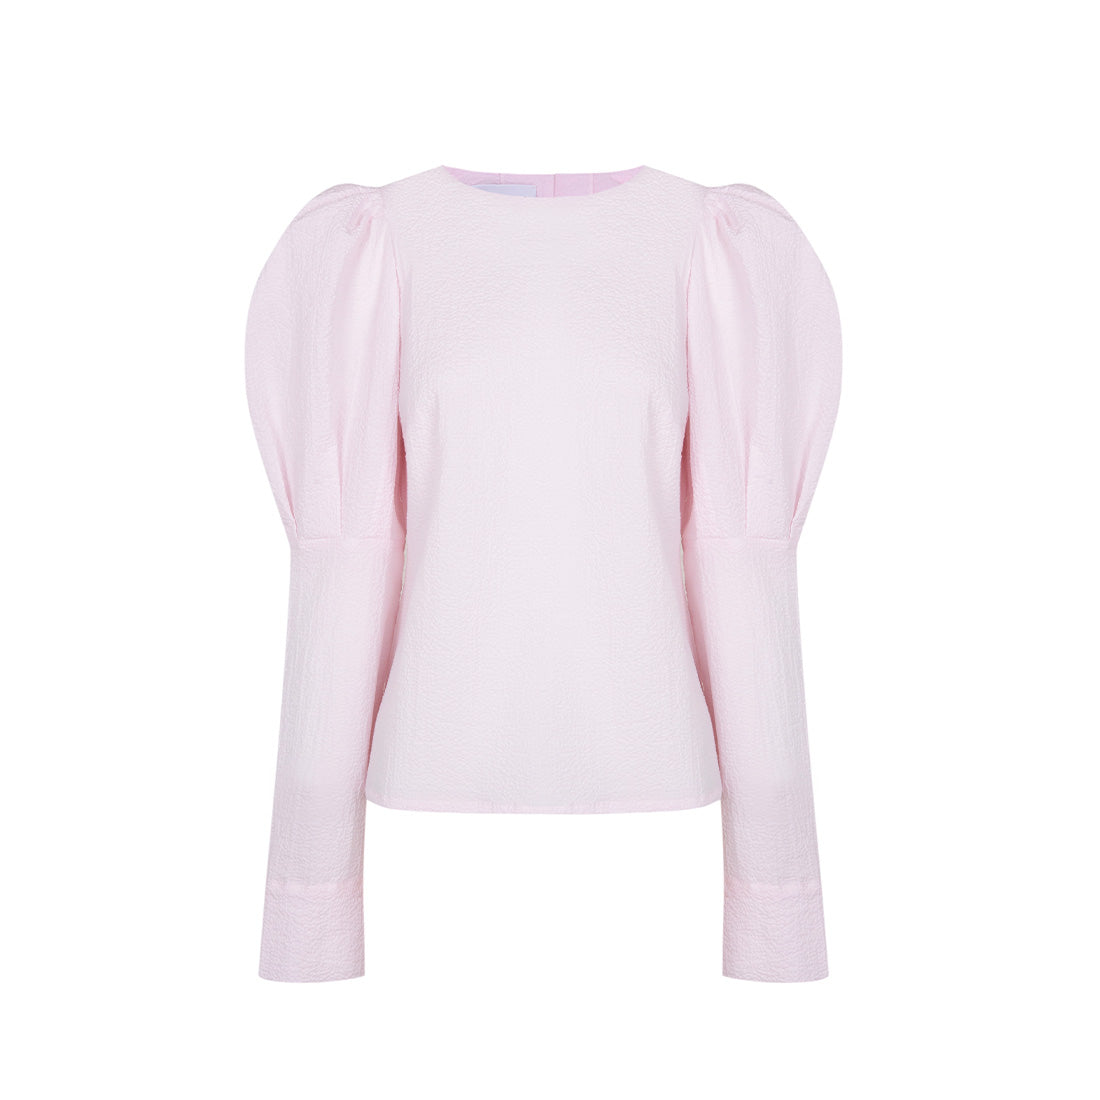 THE PINK DION BLOUSE